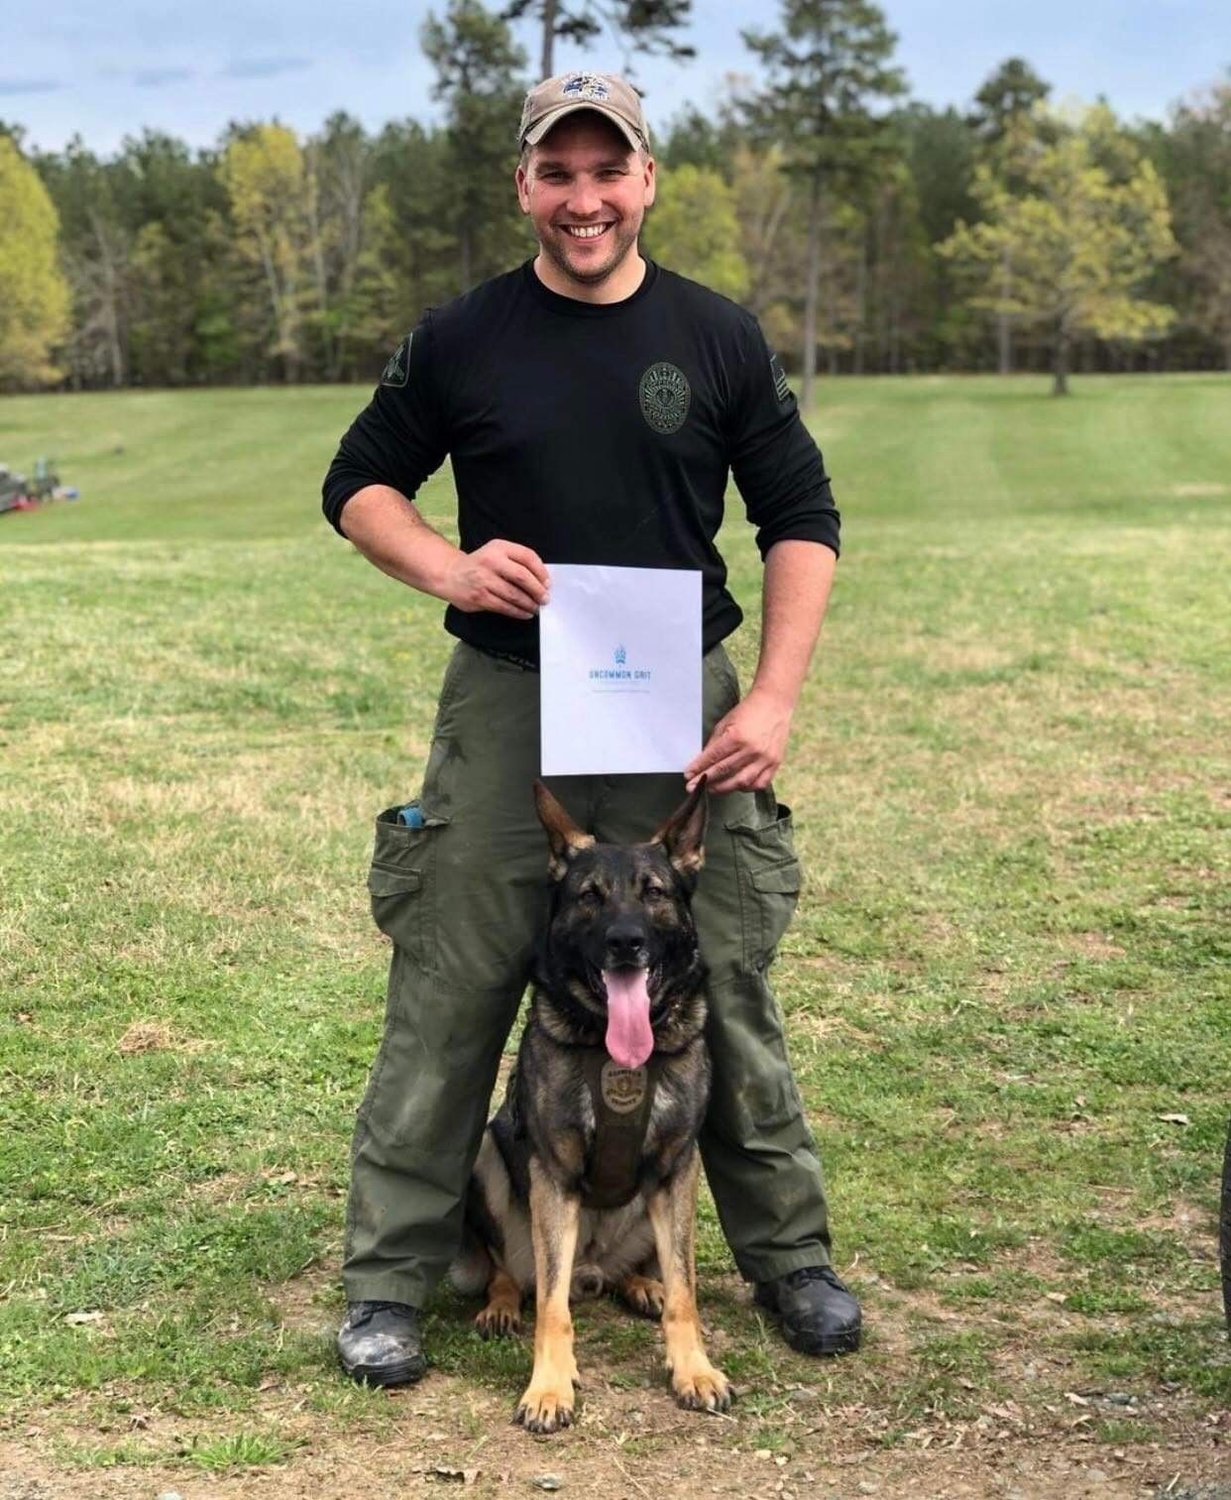 Hatboro police K9 officer Ryan Allen will be placed on hospice care, after a bee sting last fall caused cardiac arrest that led to extensive brain damage. Allen helped start Hatboro’s K9 unit.